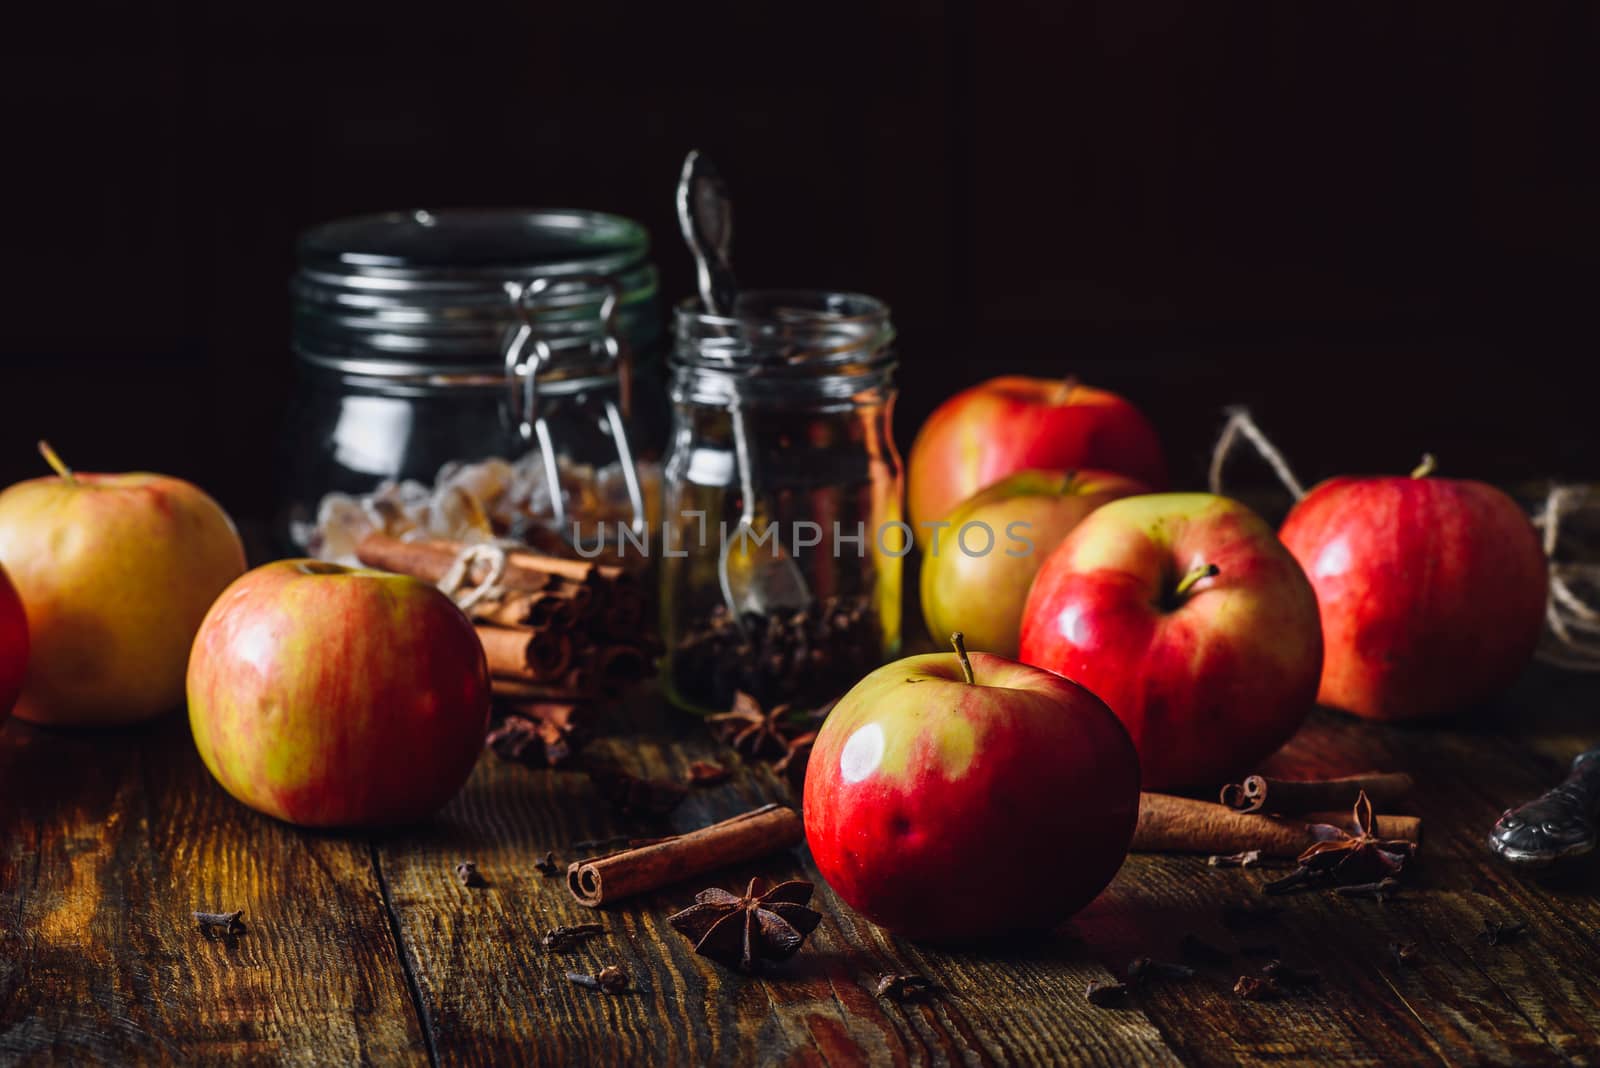 Red Apples with Spices for Grog. by Seva_blsv